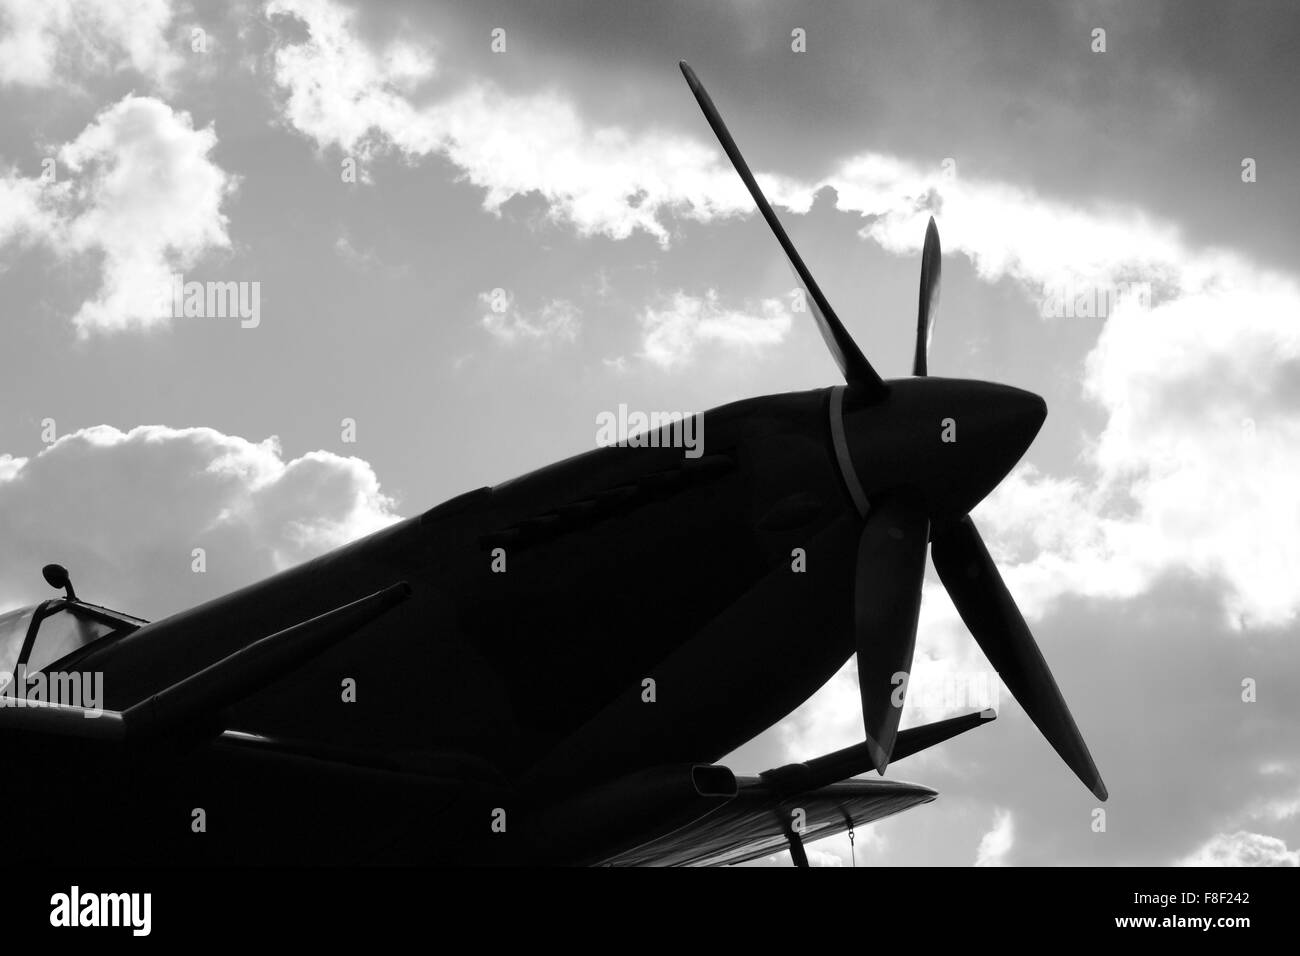 Silhouette of a Supermarine Spitfire against a blue sky with clouds Stock Photo